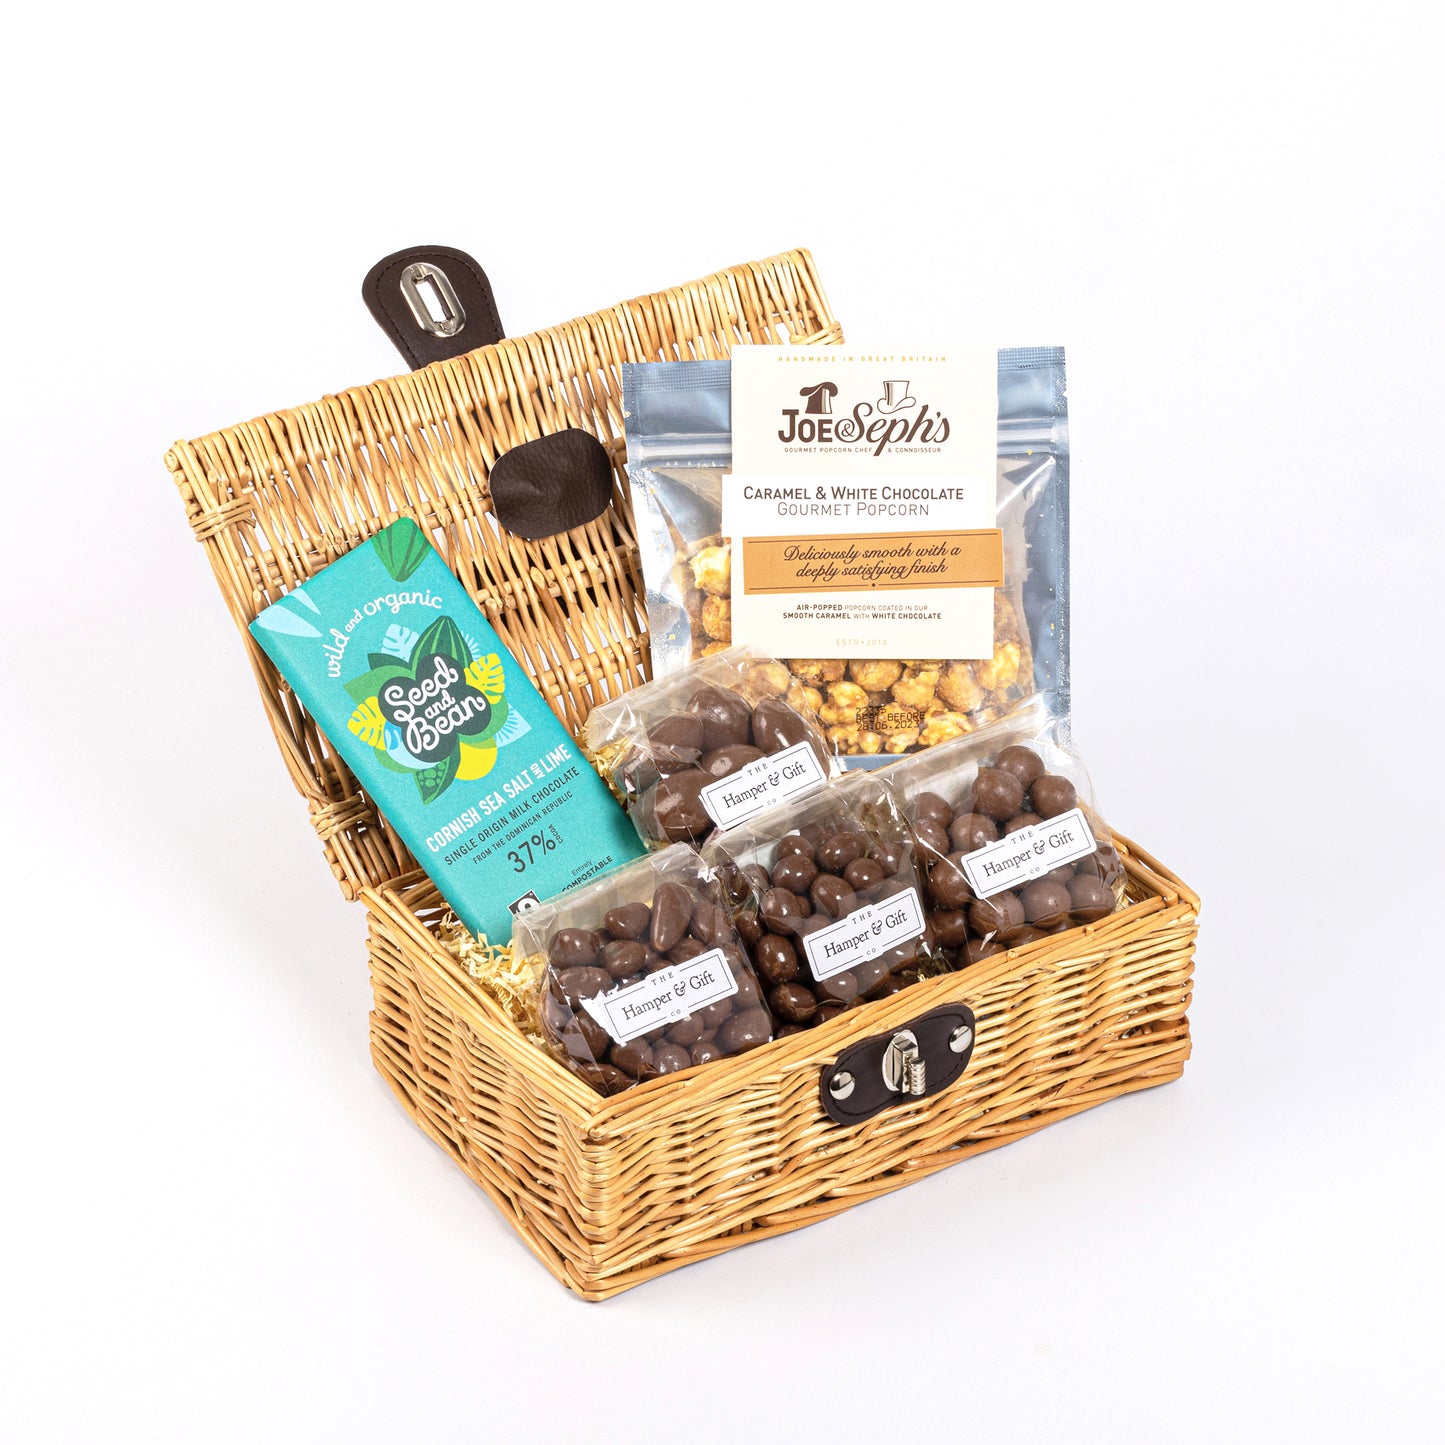 Little Chocolate Hamper filled with a variety of chocolate and gourmet popcorn